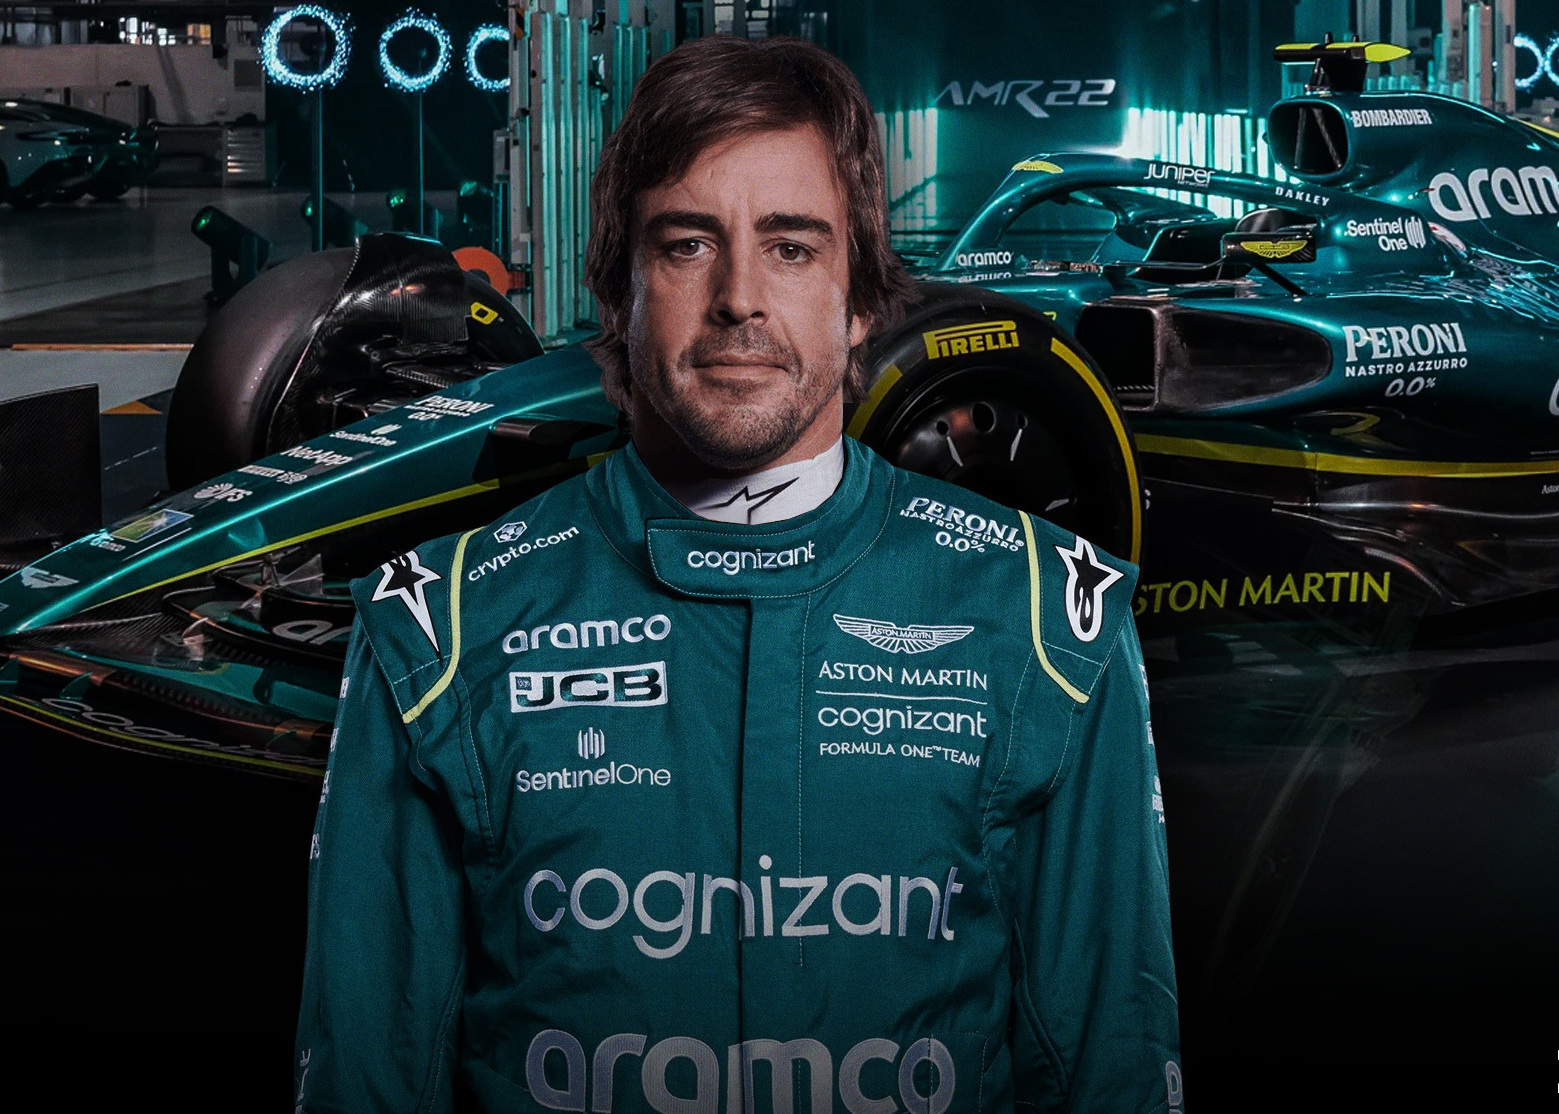 The Fernando Alonso Aston Martin match-up is exactly what Formula